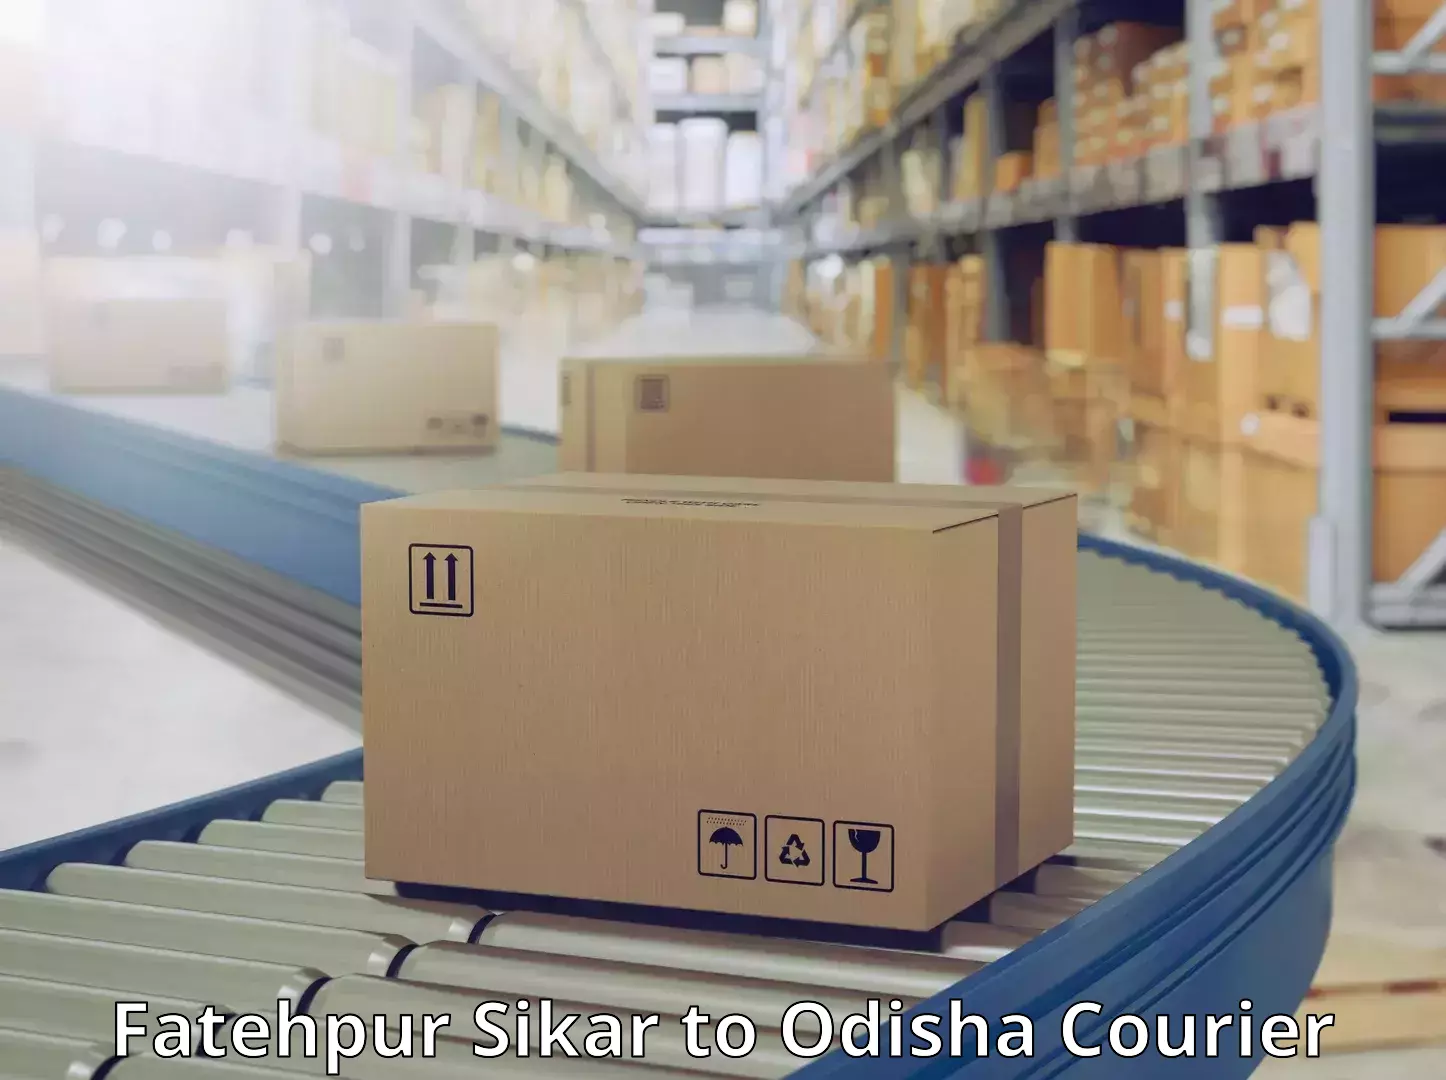 Trackable shipping service Fatehpur Sikar to Angul